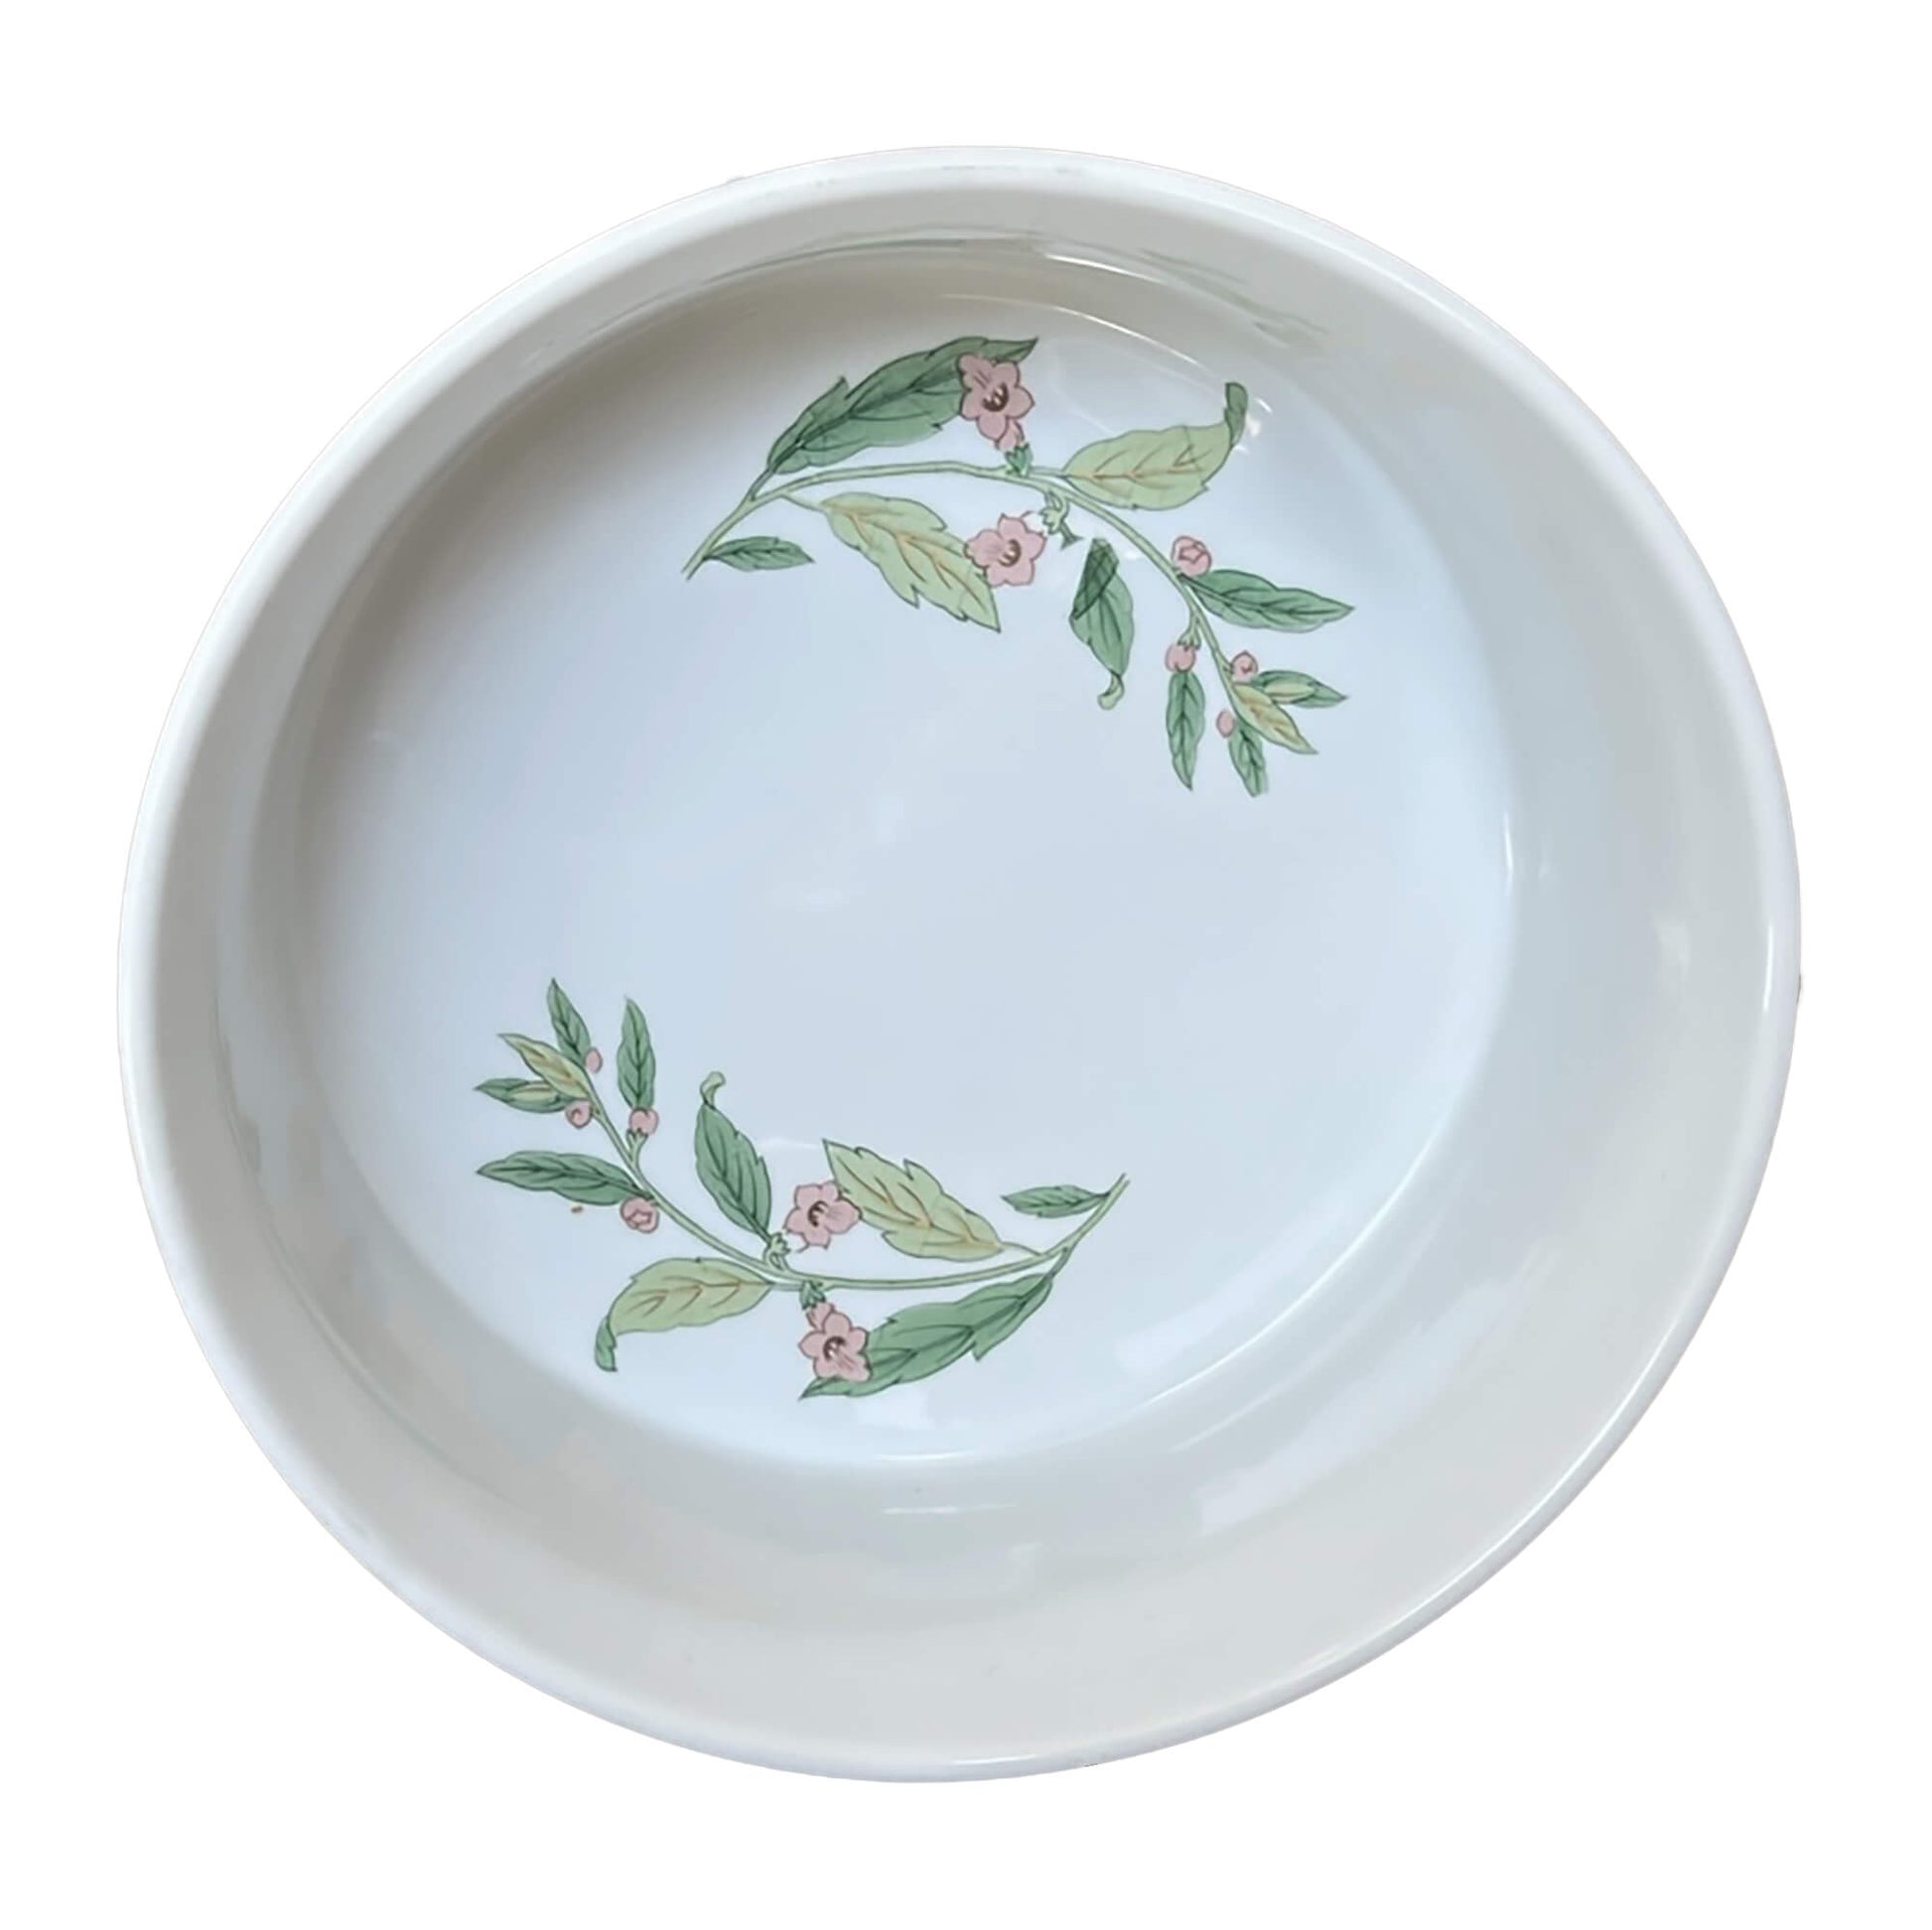 Herbs-and-Spices-Round-Porcelain-9-in-Souffle-Dish.-Shop-eBargainsAndDeals.com.